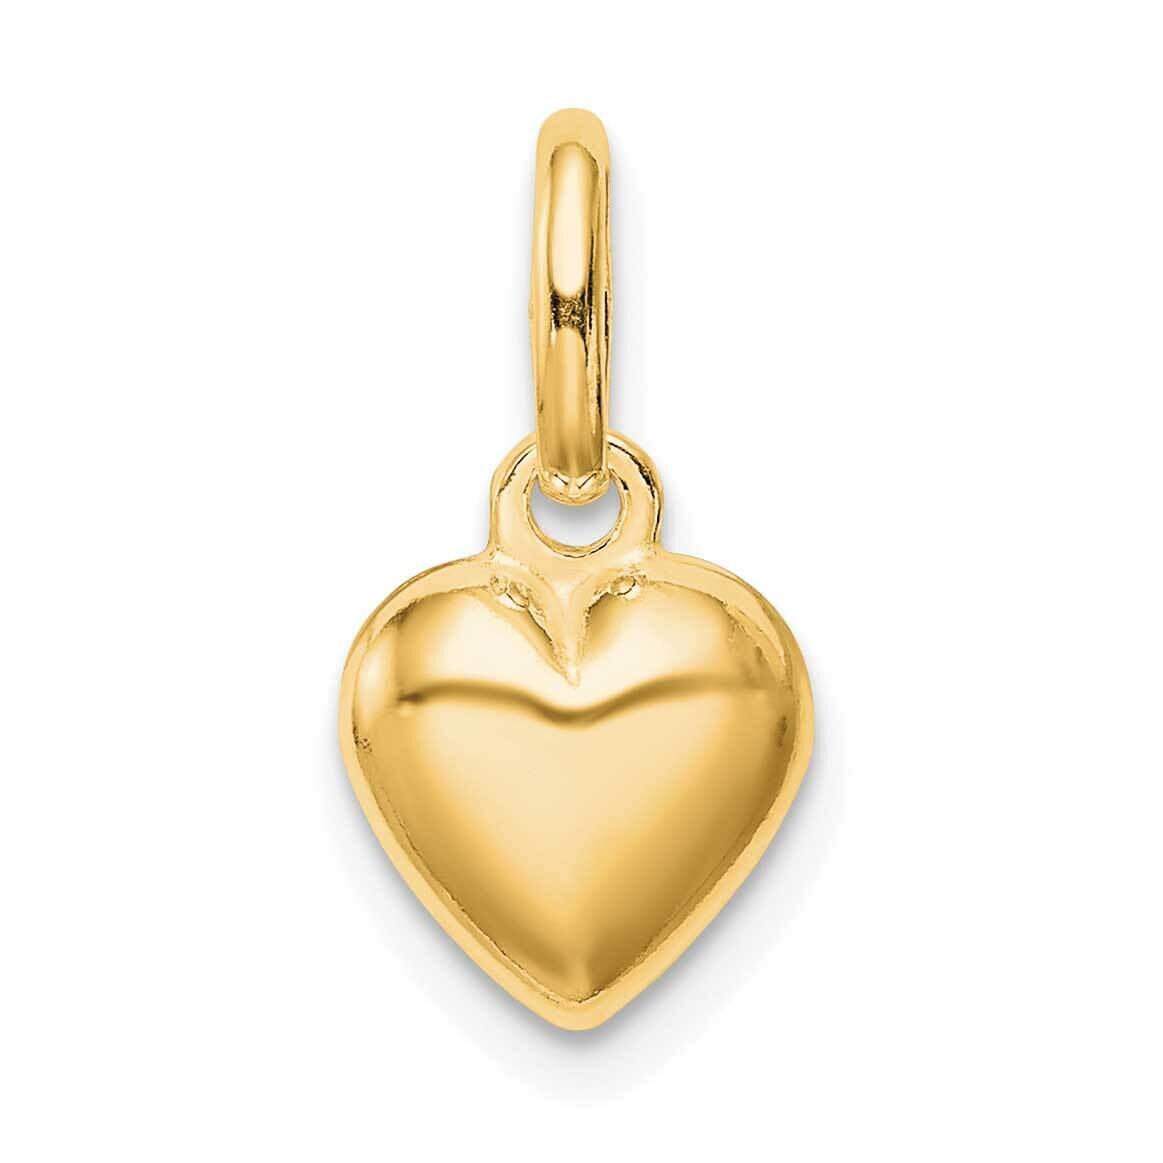 Polished Puff Heart Charm Sterling Silver Gold-Tone QC8466GP